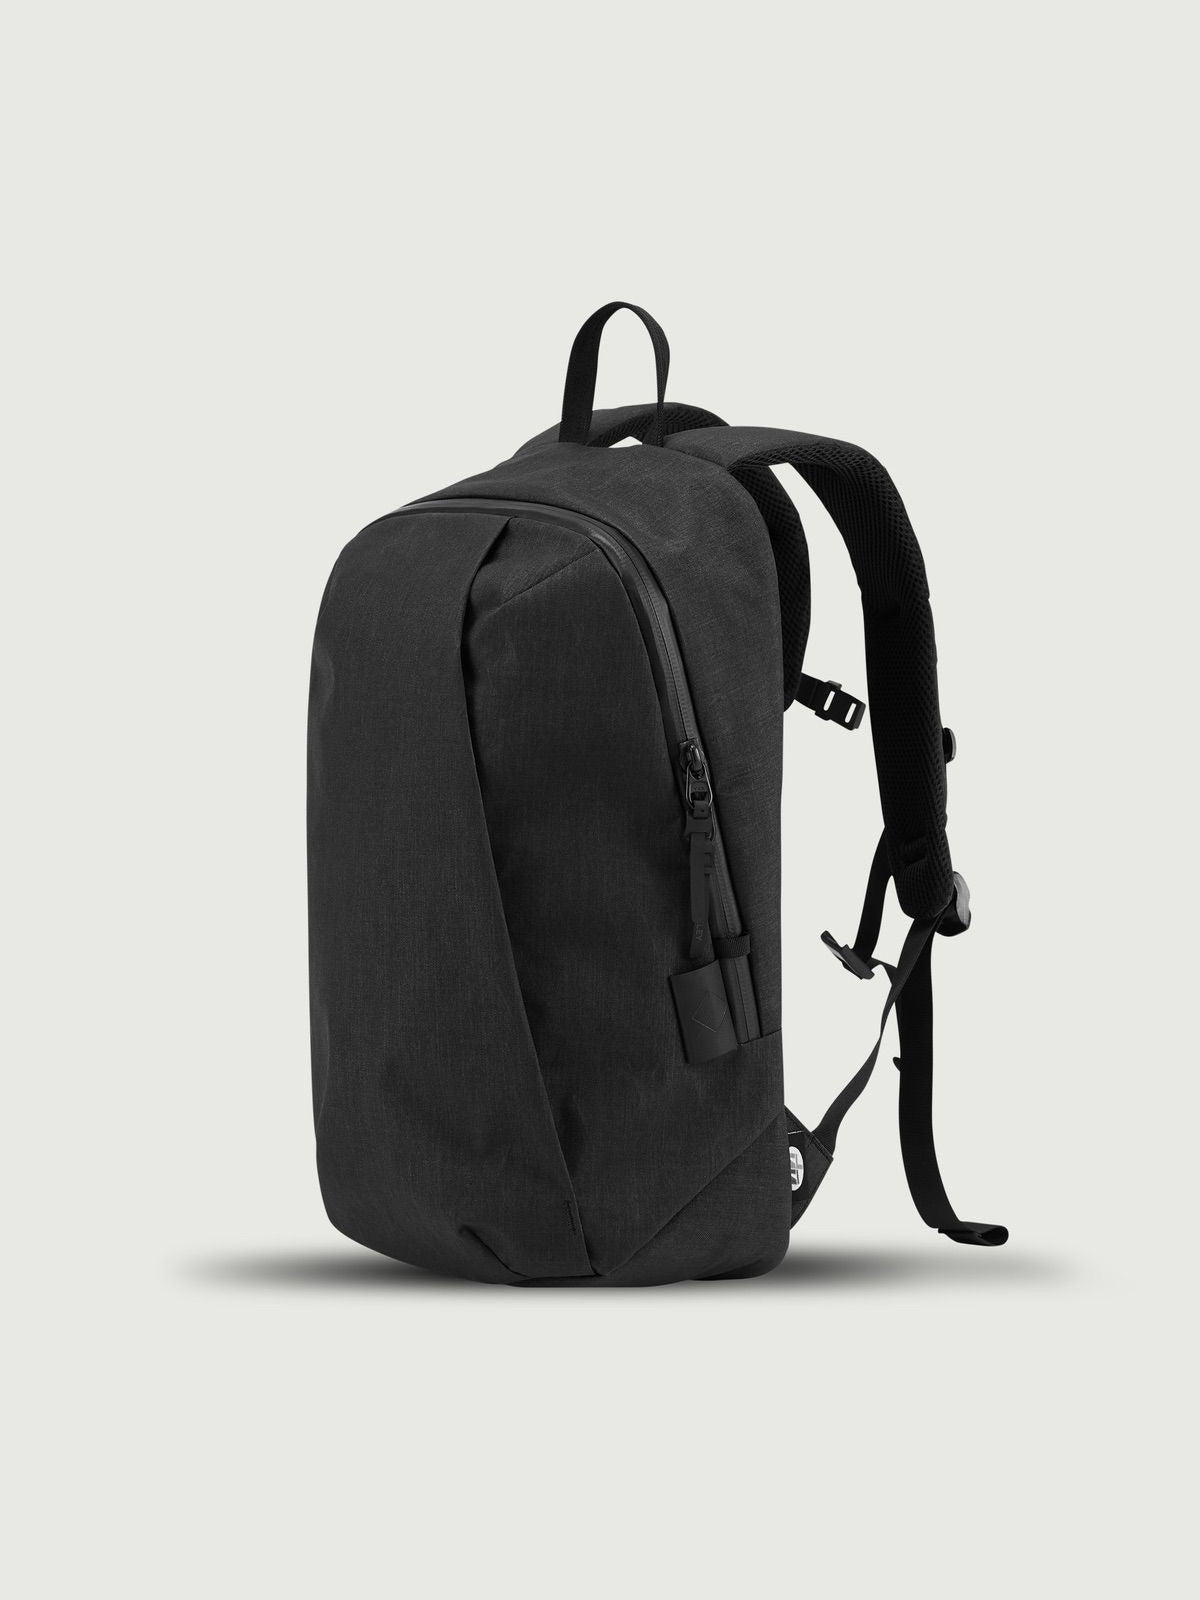 STEM | EVERYDAY PACK - X-PAC® X50 TACTICAL